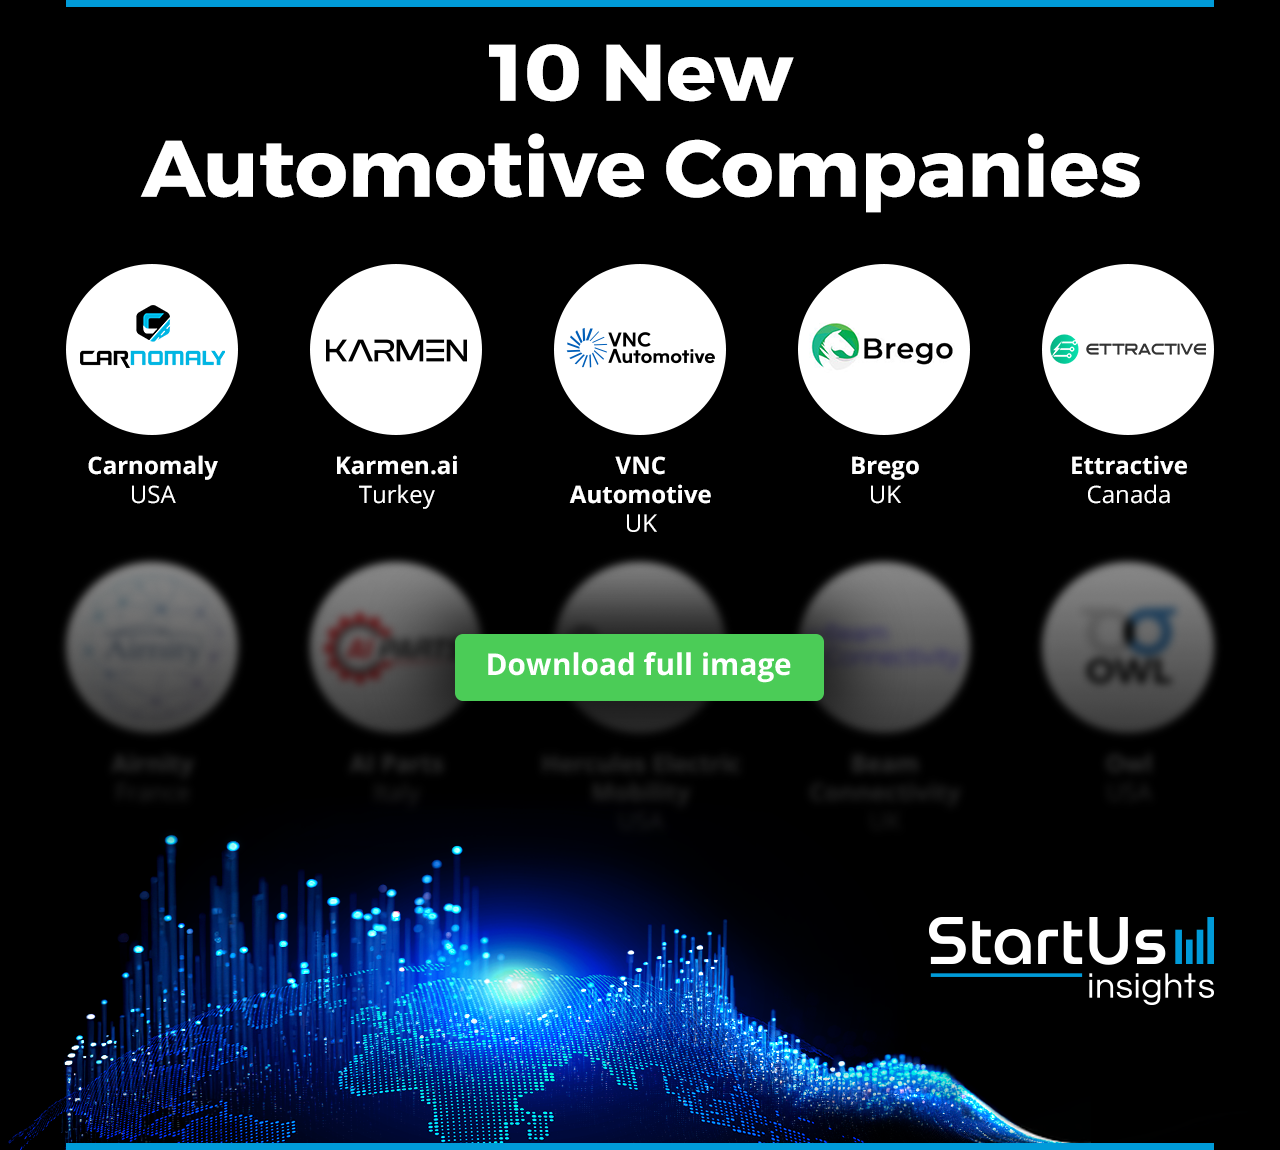 New-Automotive-Companies-Logos-Blurred-StartUs-Insights-noresize